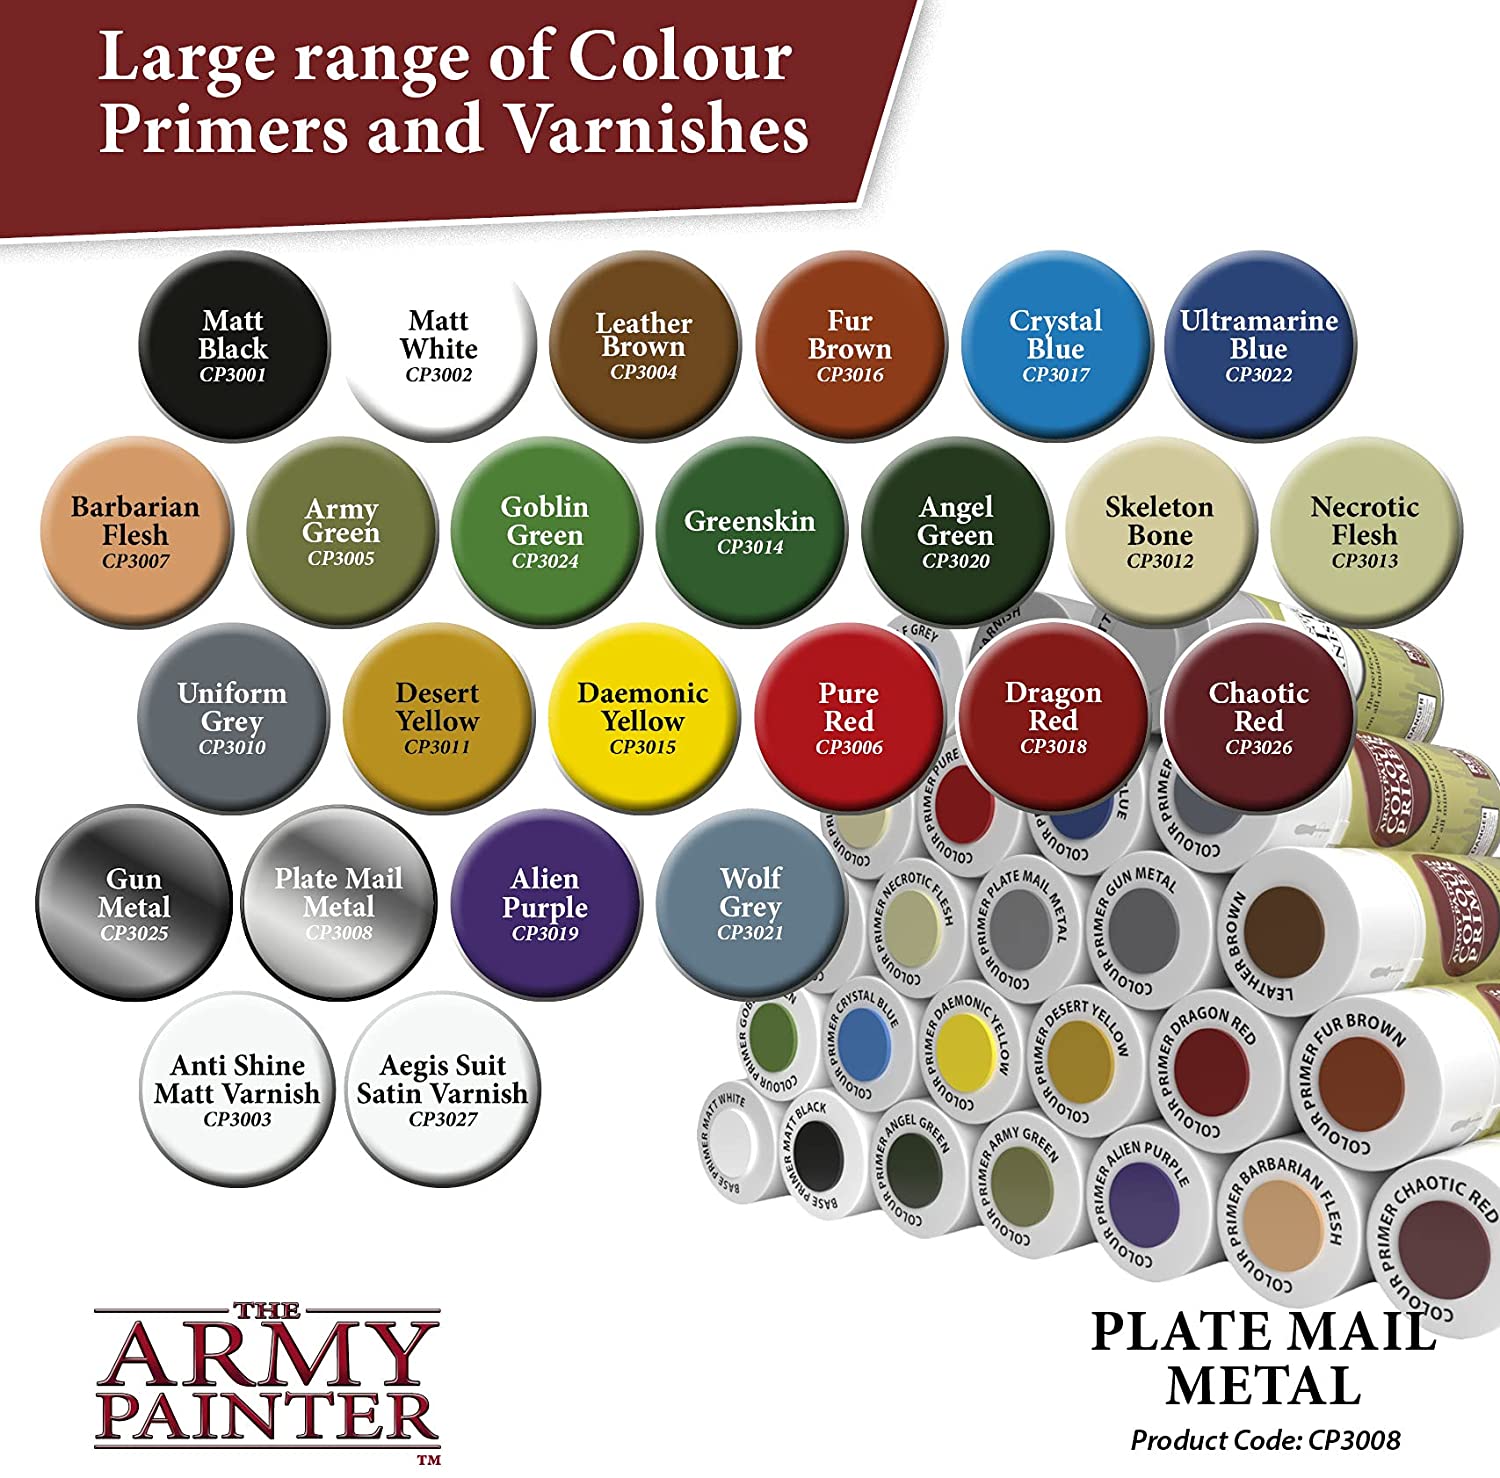 The Army Painter - Colour Primer: Plate Mail Metal